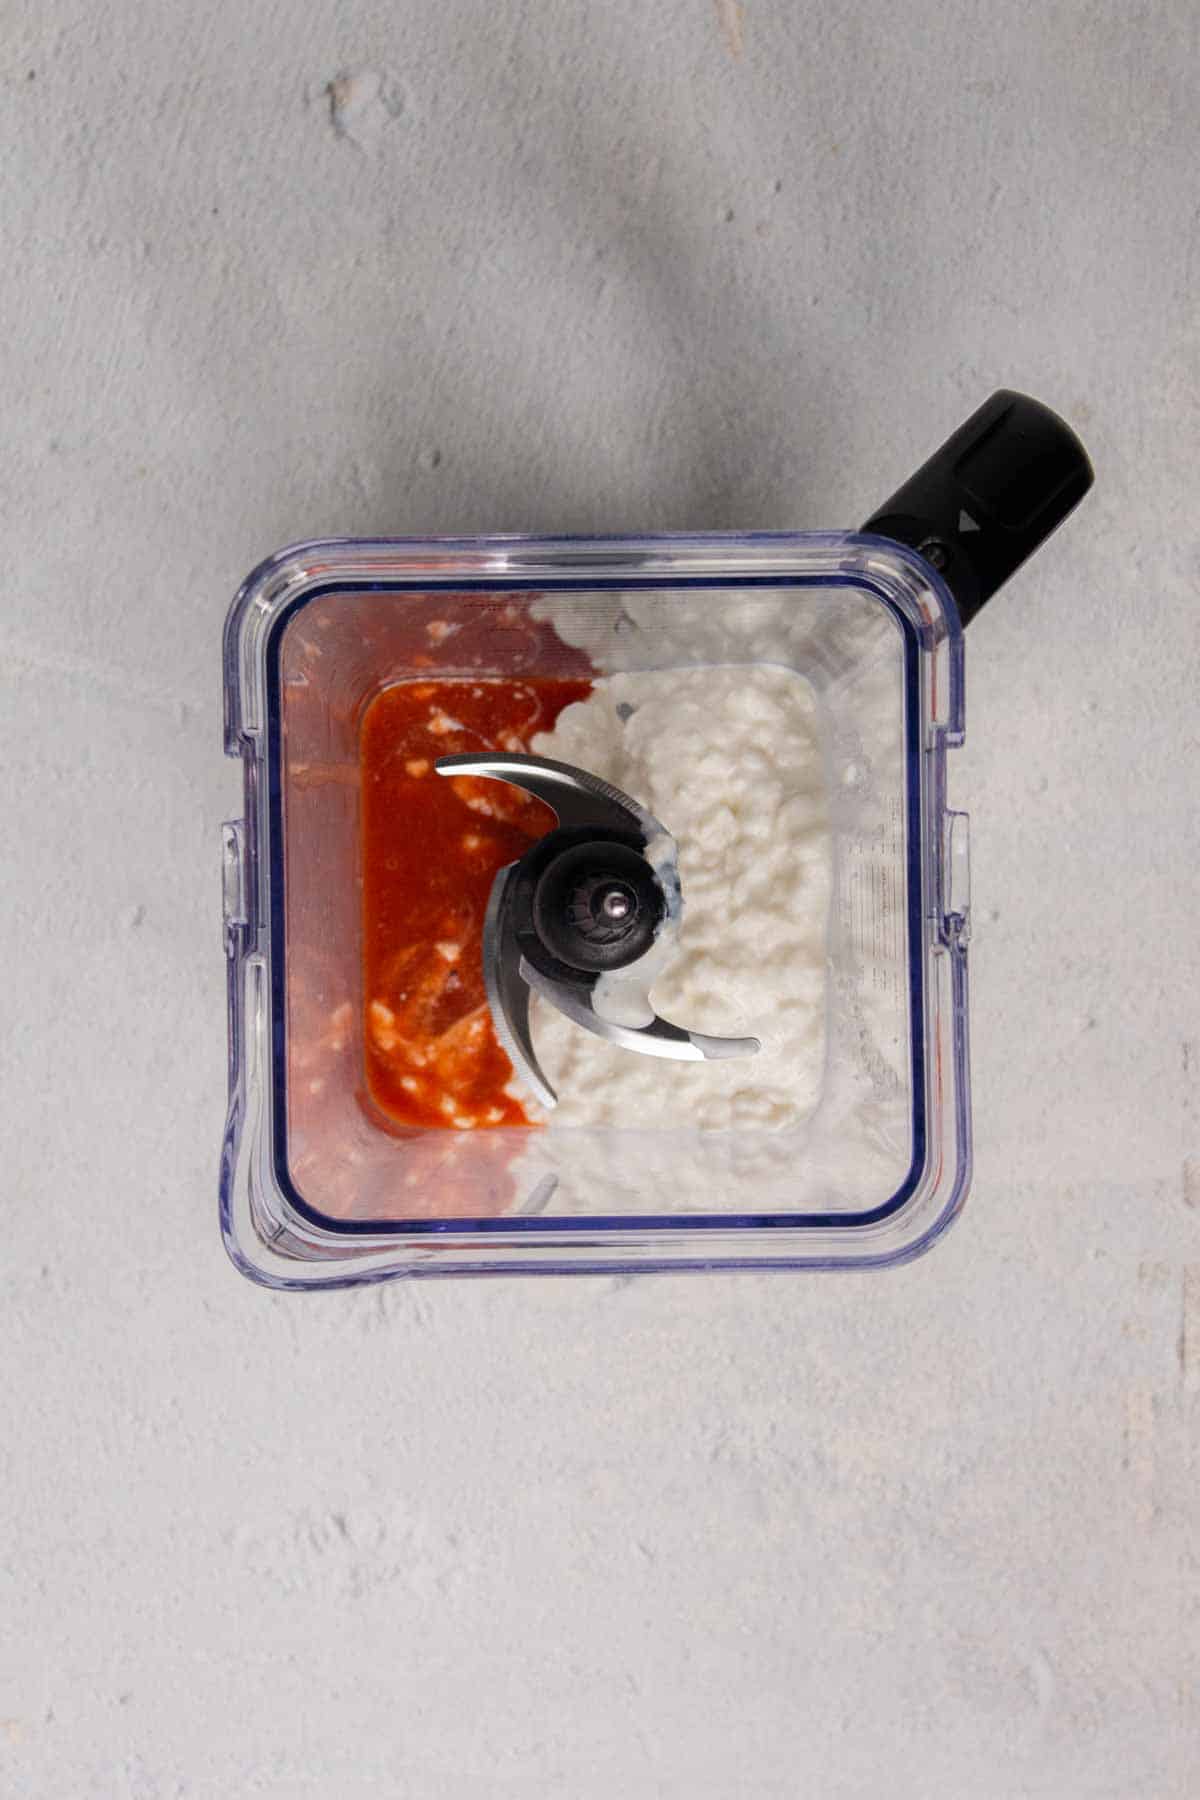 Hot sauce and cottage cheese in blender.